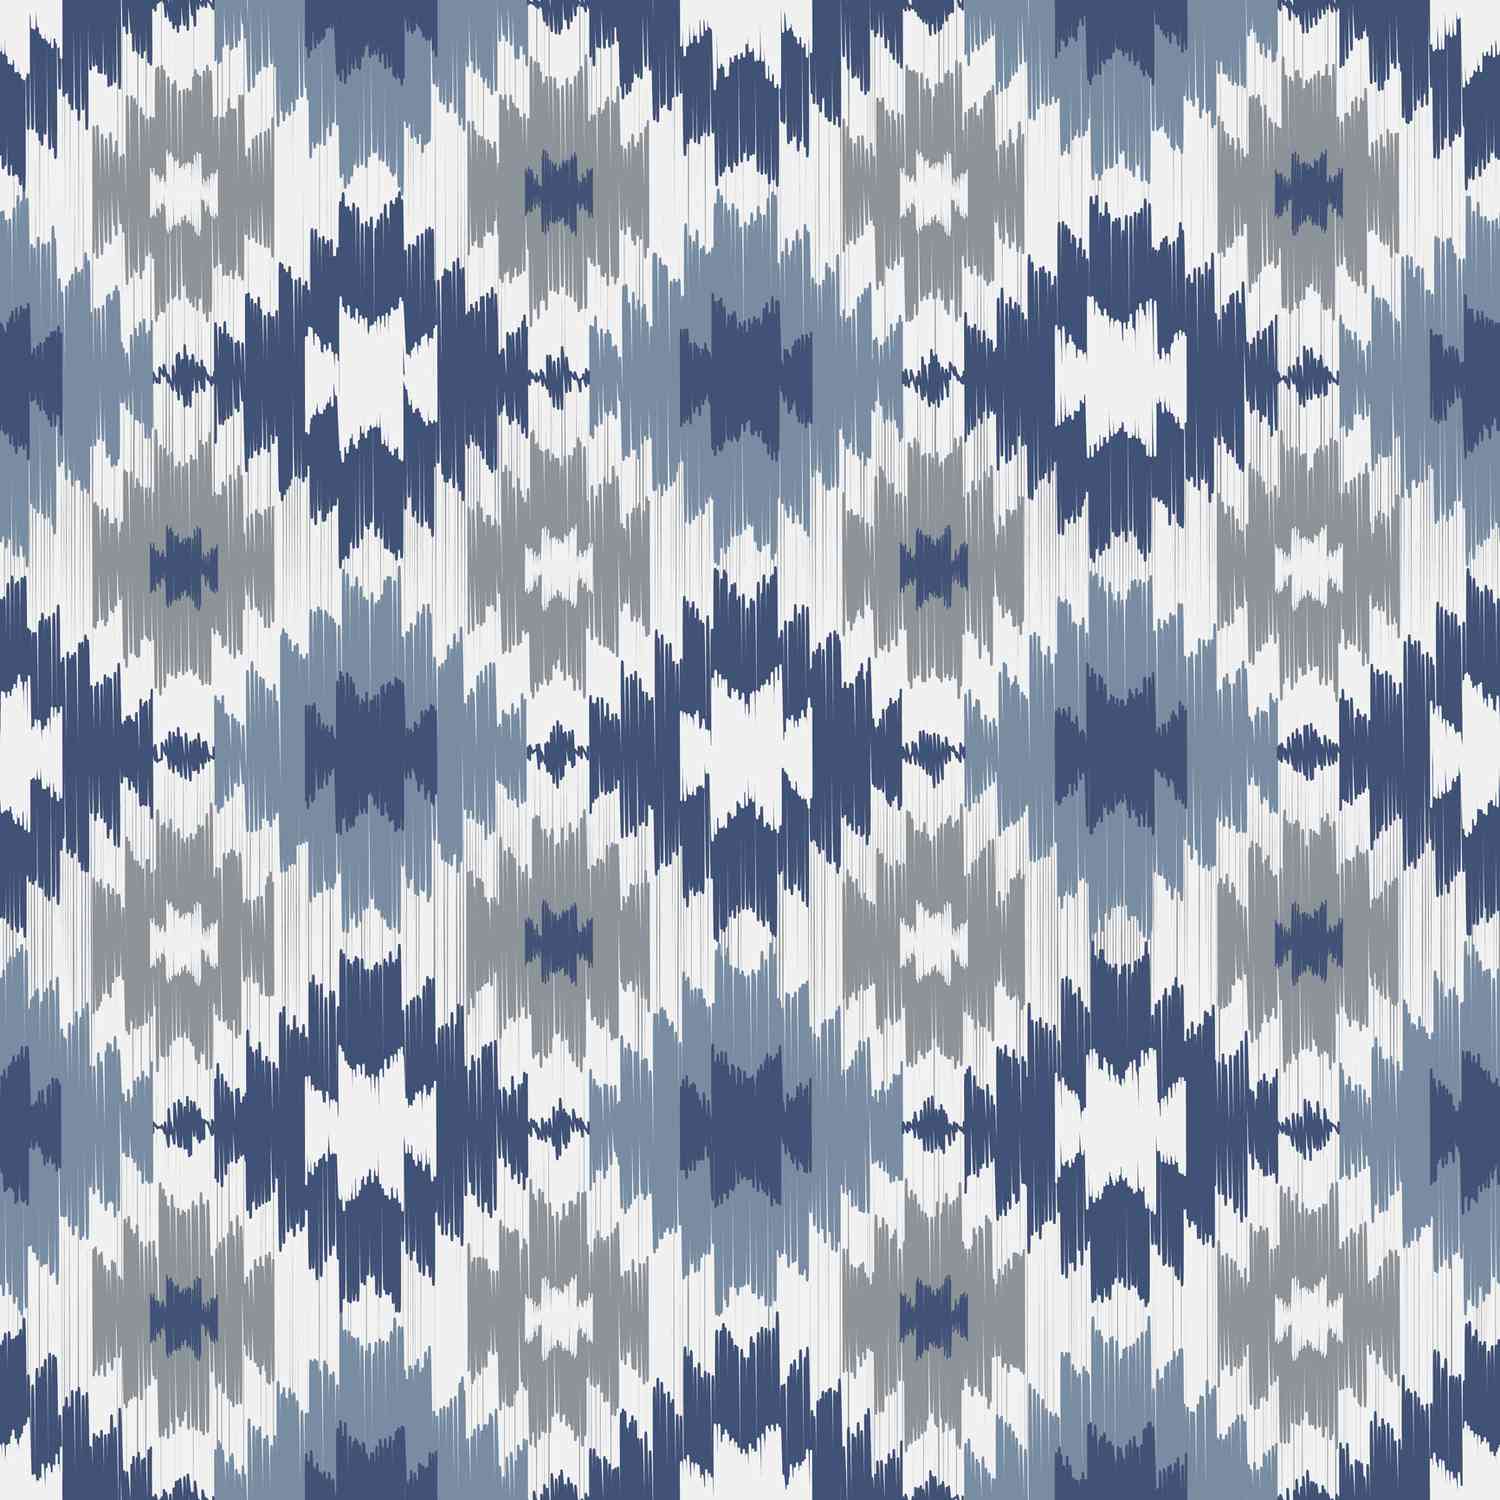 Ikat pattern in blue and gray